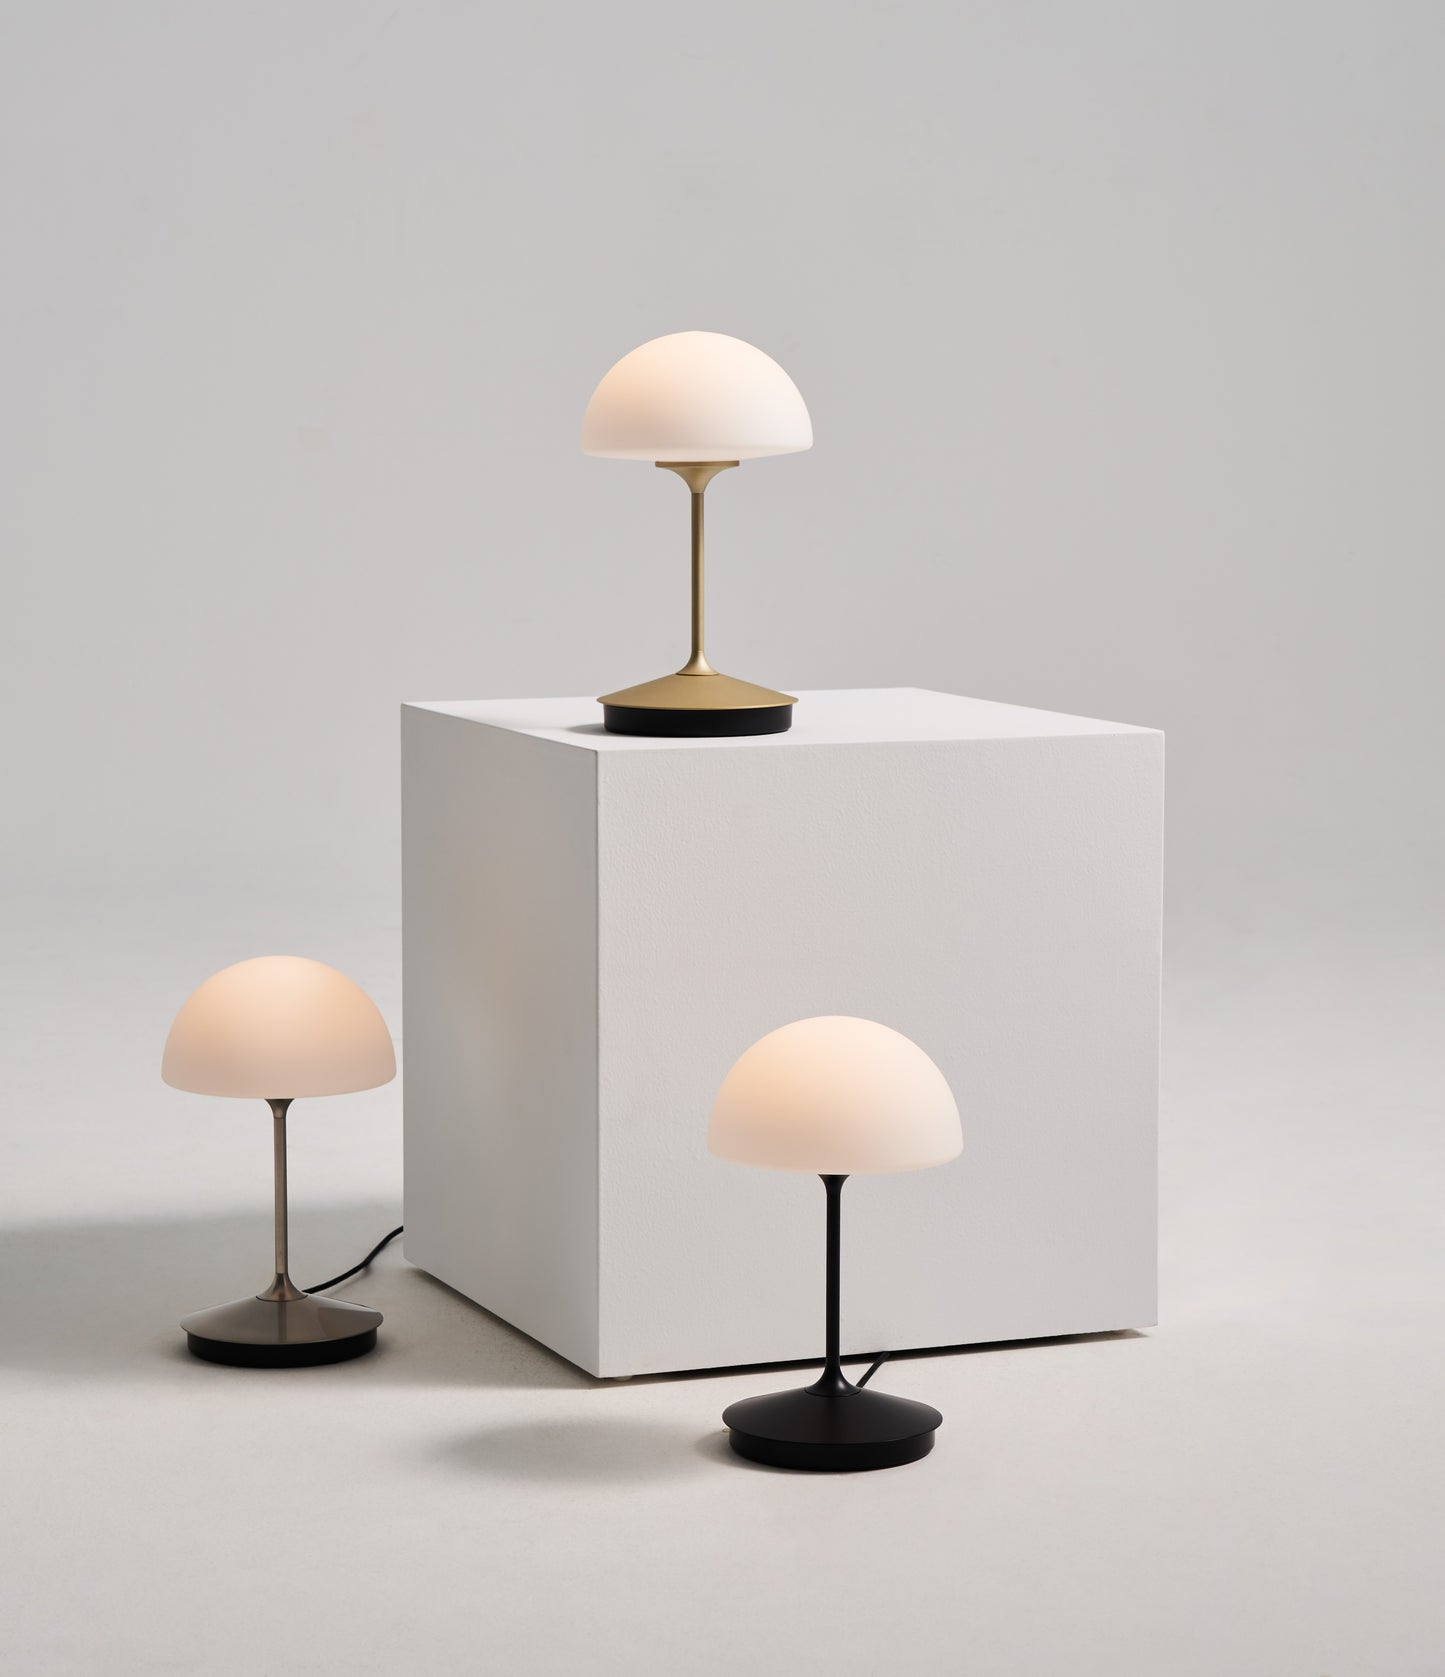 Seed Design Pensee LED Table Lamp Gold